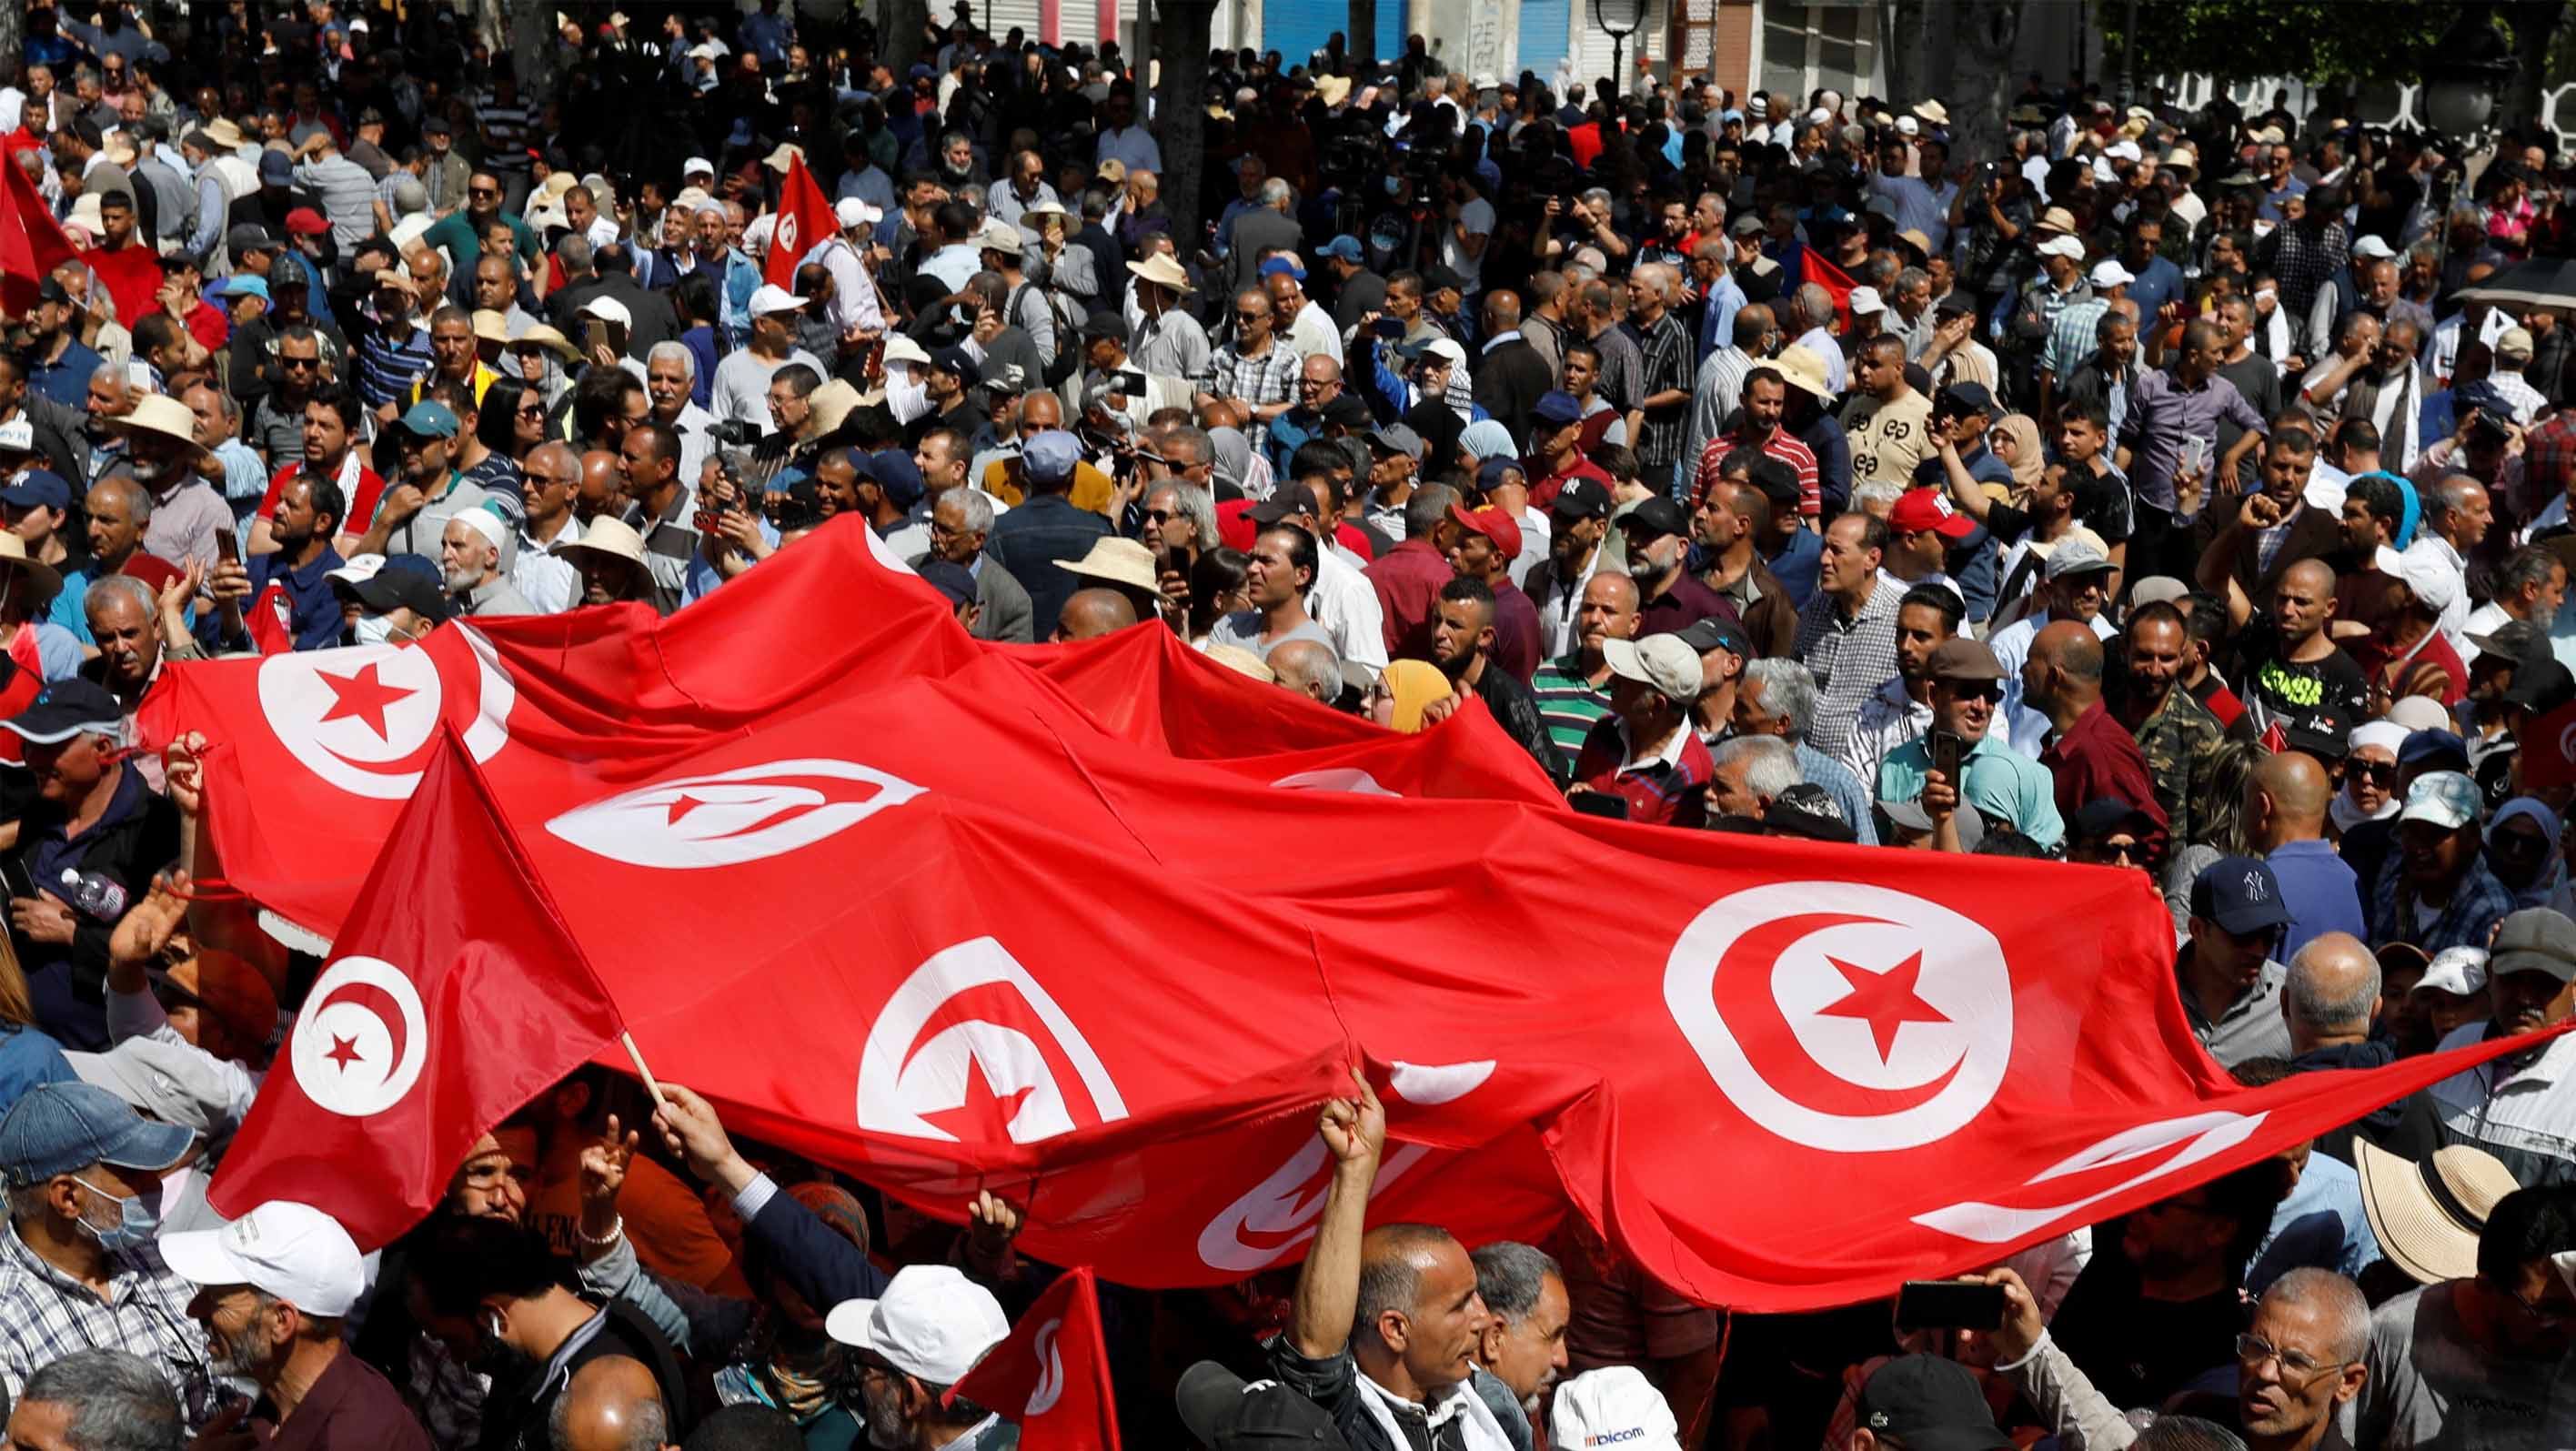 Tunisia’s low voter turnout in recent elections is referendum against Kais Saied